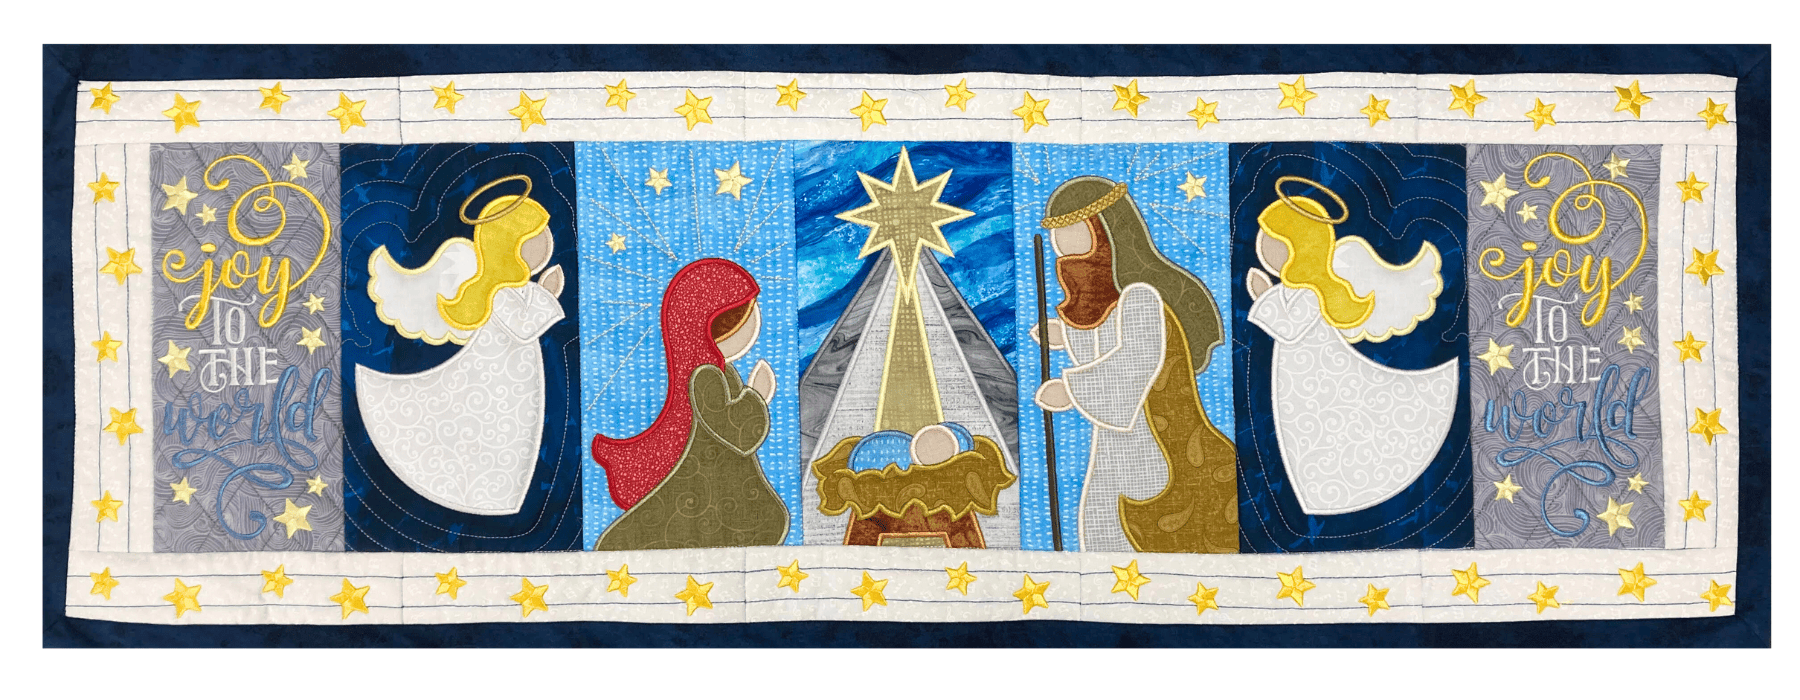 Nativity Table Runner Kit - Machine Embroidery